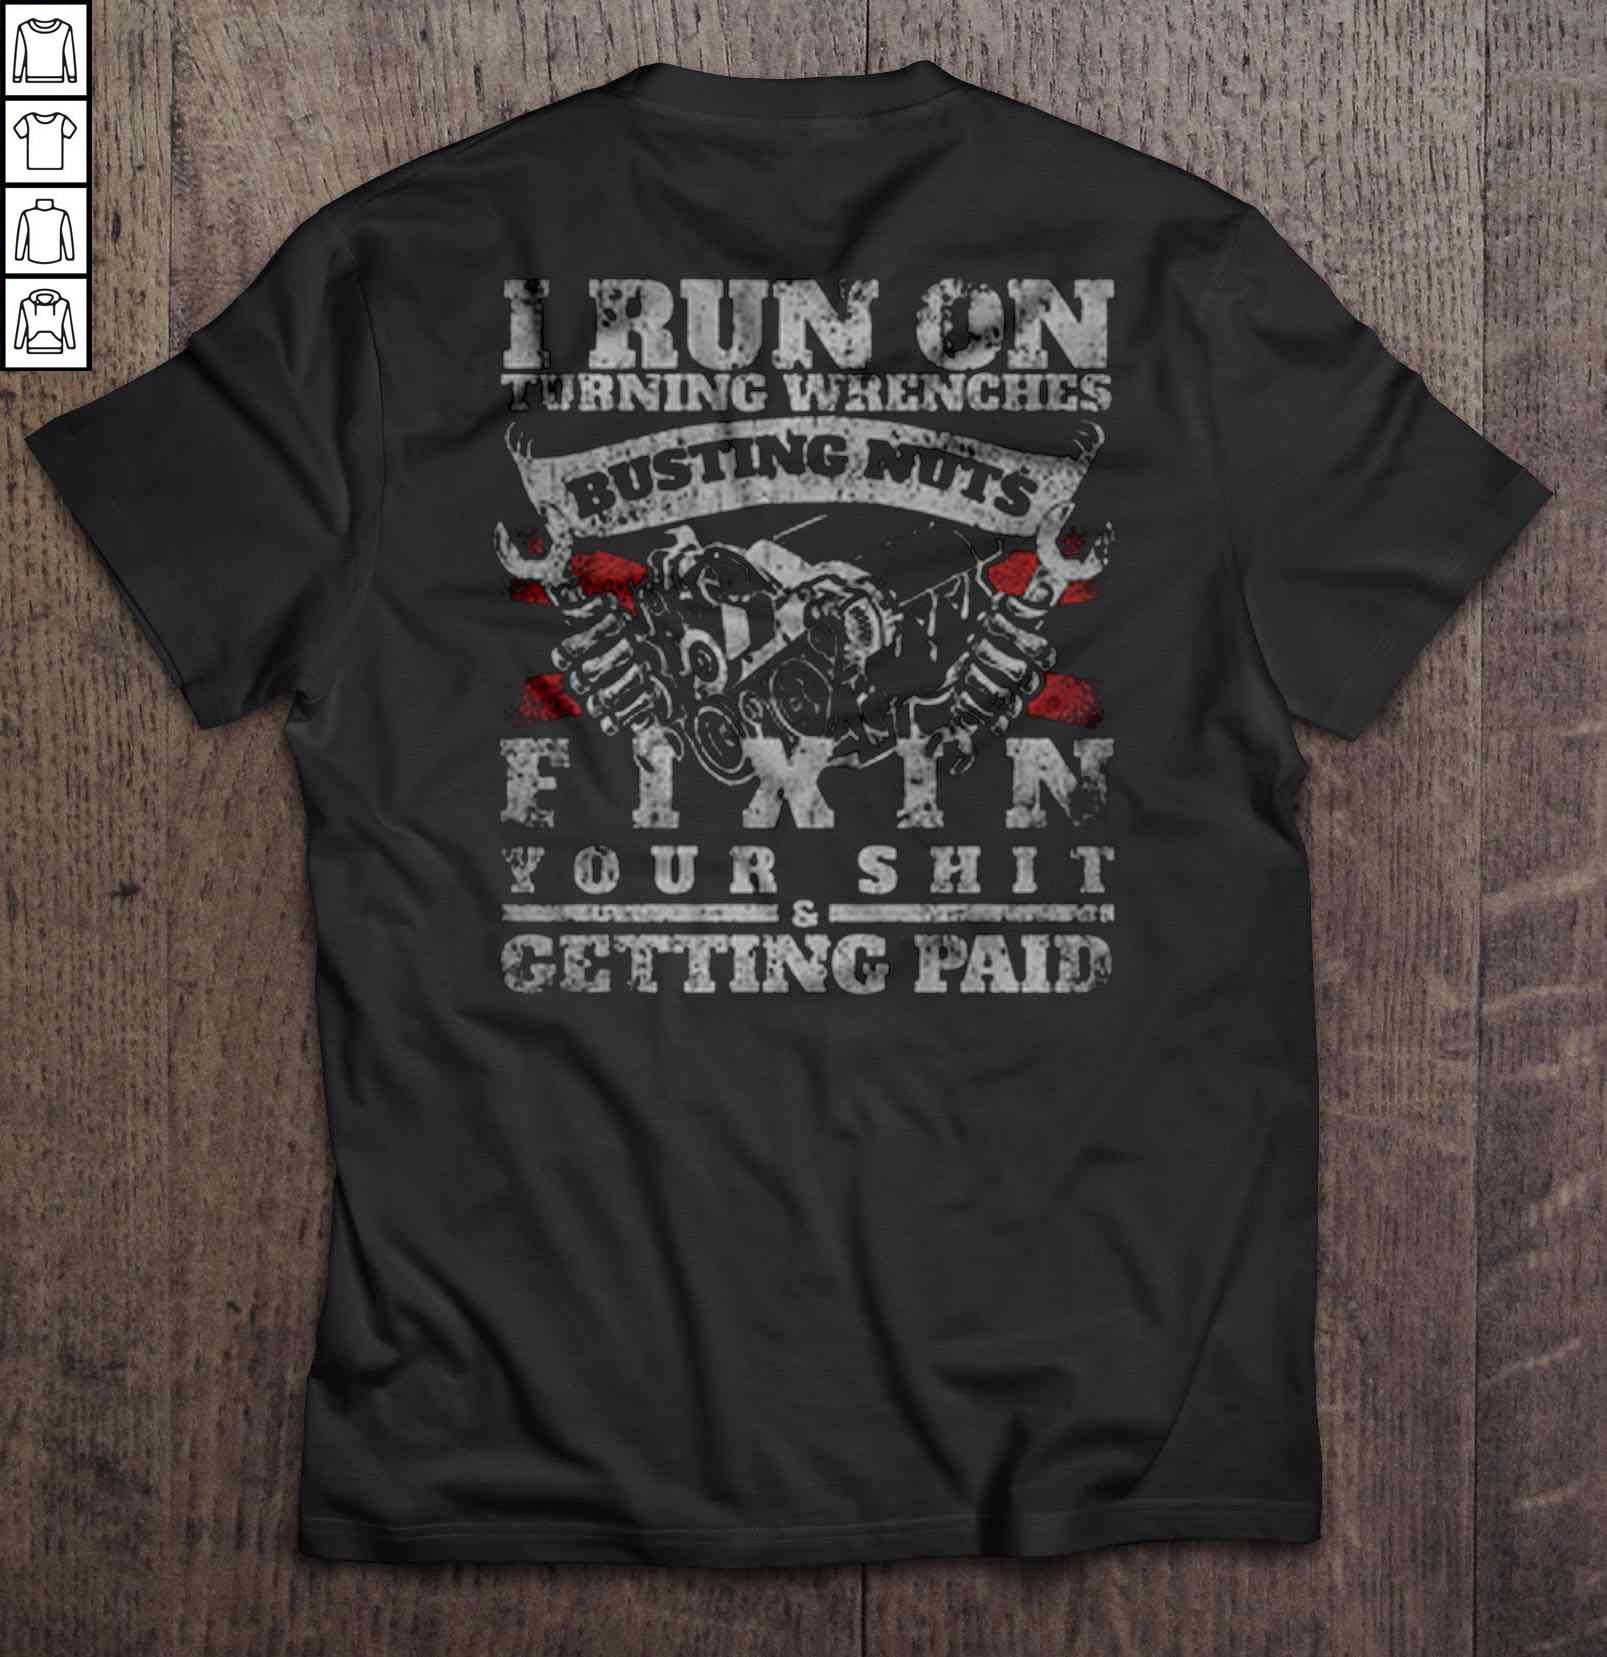 I Run On Turning Wrenches Busting Nuts Fixin Your Shit & Getting Paid TShirt Gift